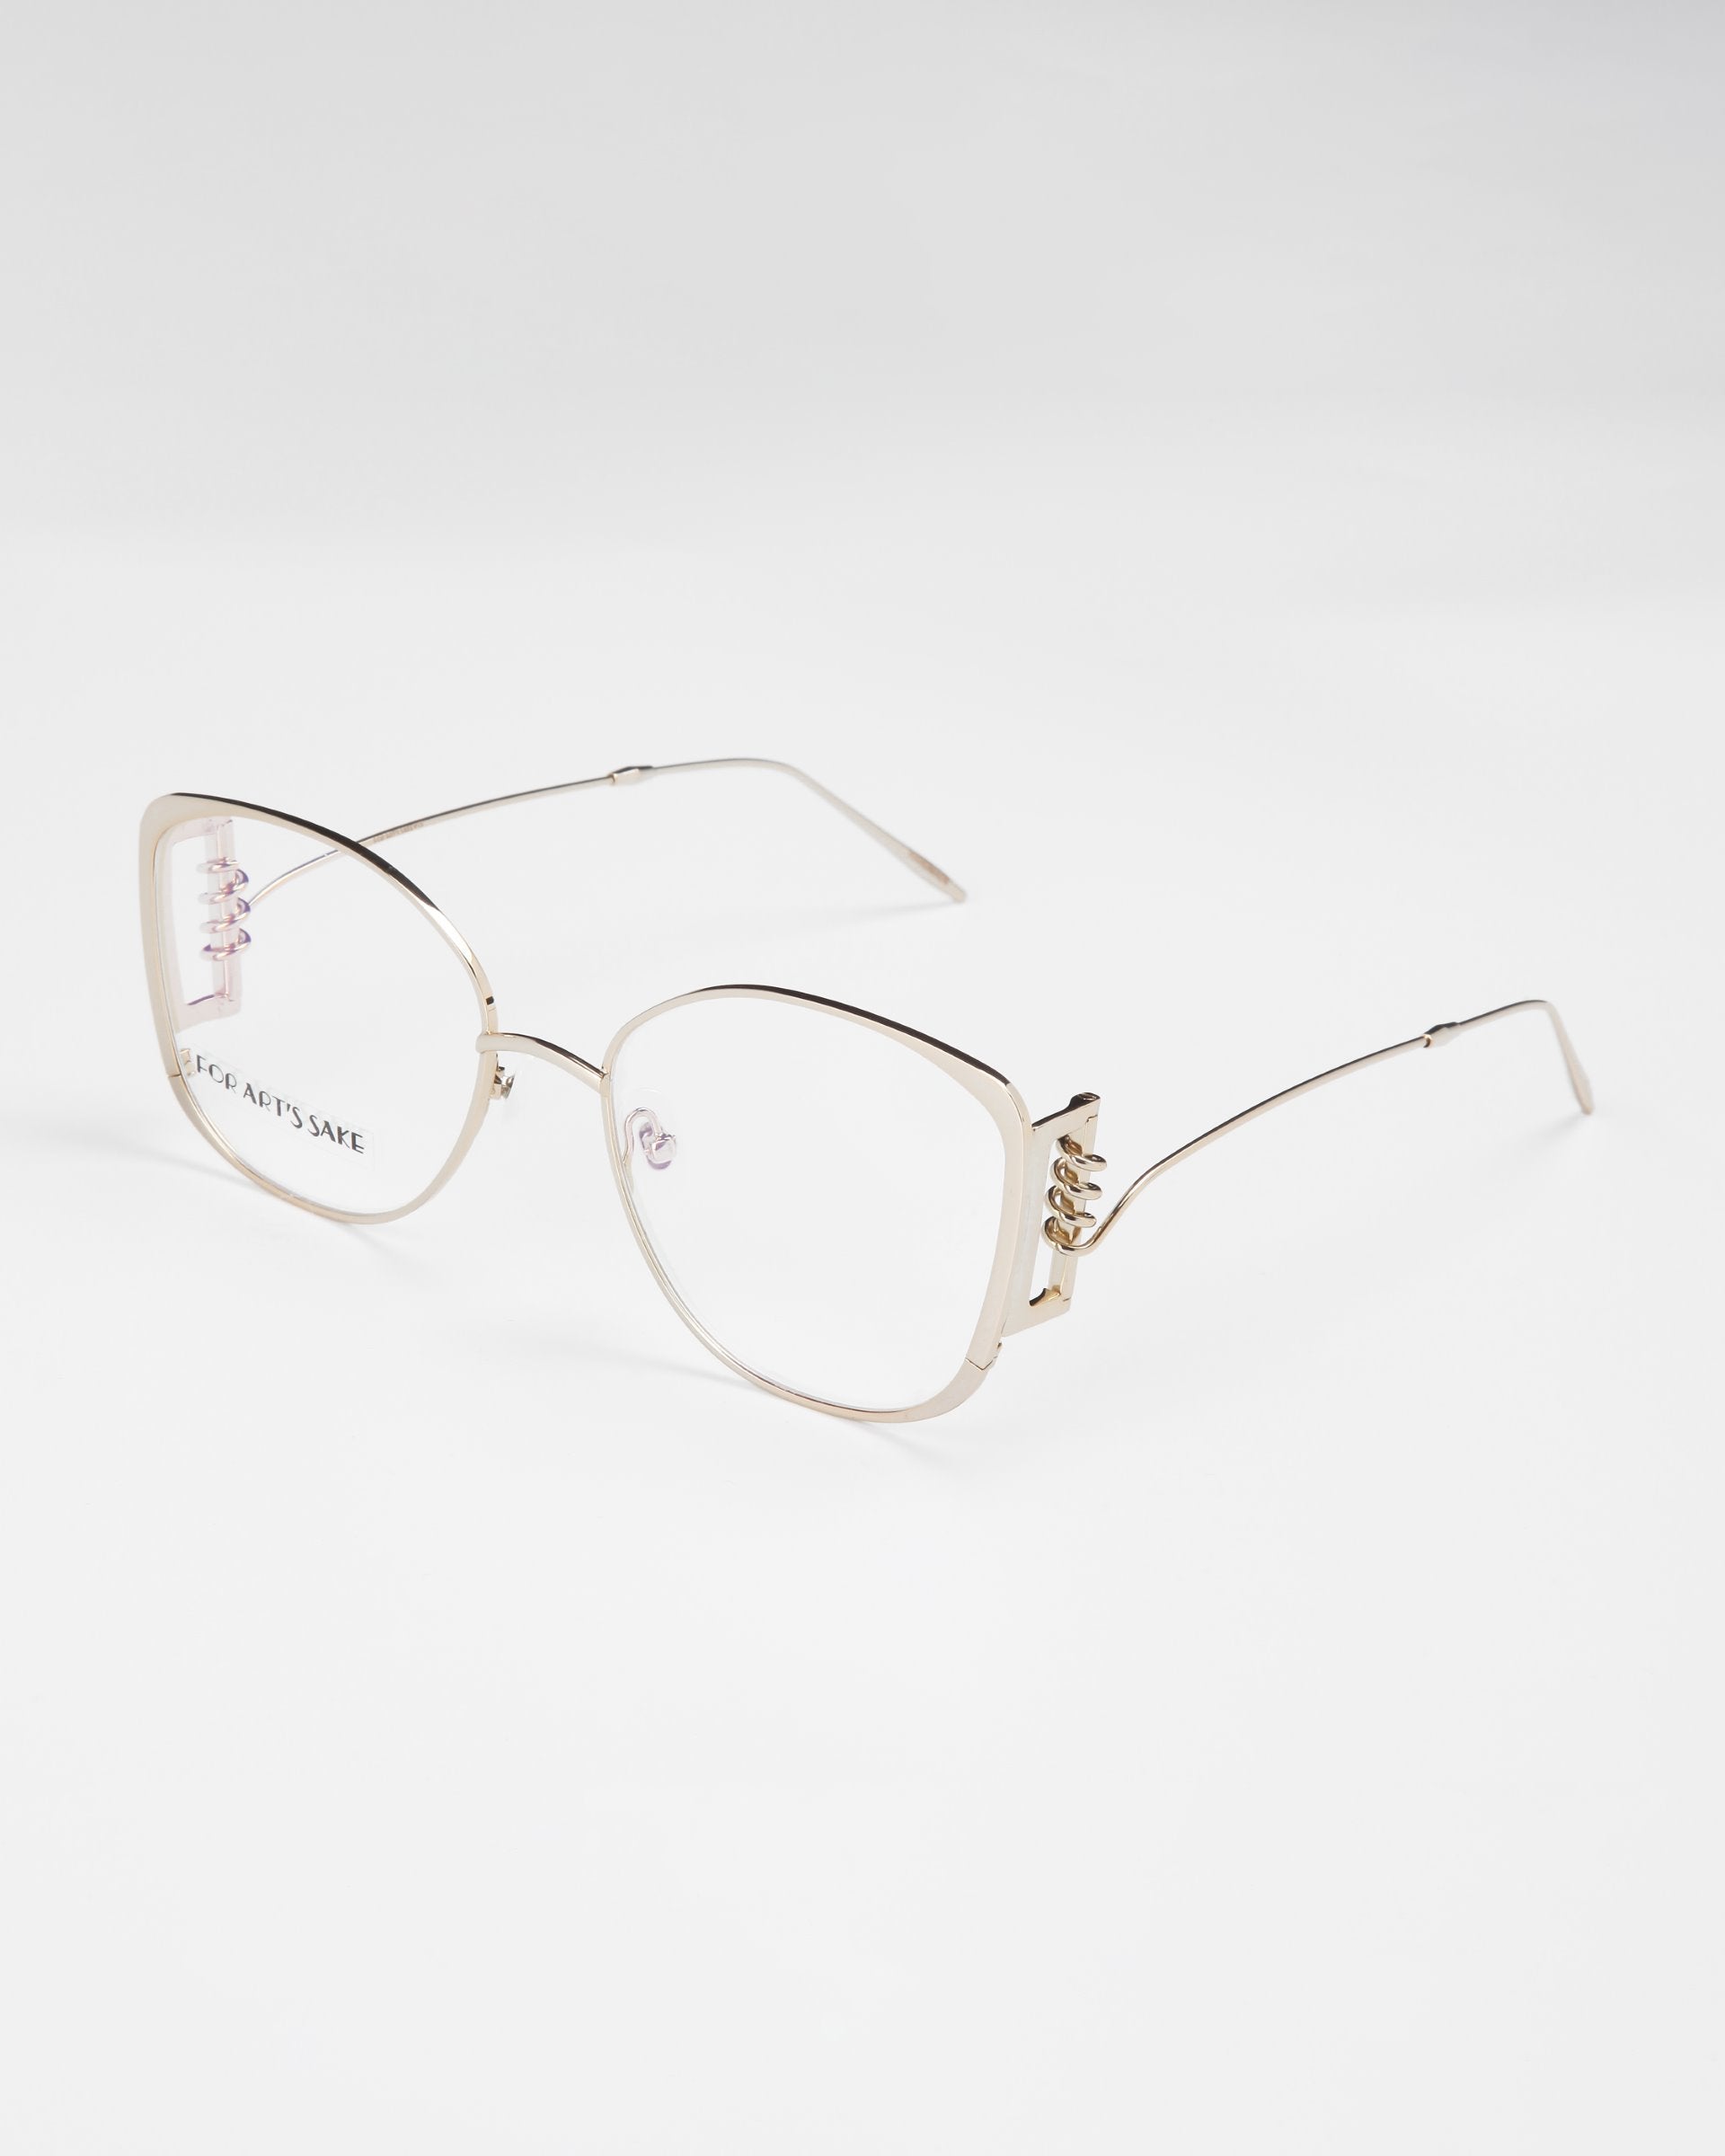 A pair of stylish eyeglasses featuring large, square metal frames with thin temples is displayed against a plain white background. The Jupiter by For Art&#39;s Sake® frames have a minimalist design with subtle decorative accents on the hinges and come with an optional blue light filter for enhanced eye protection.